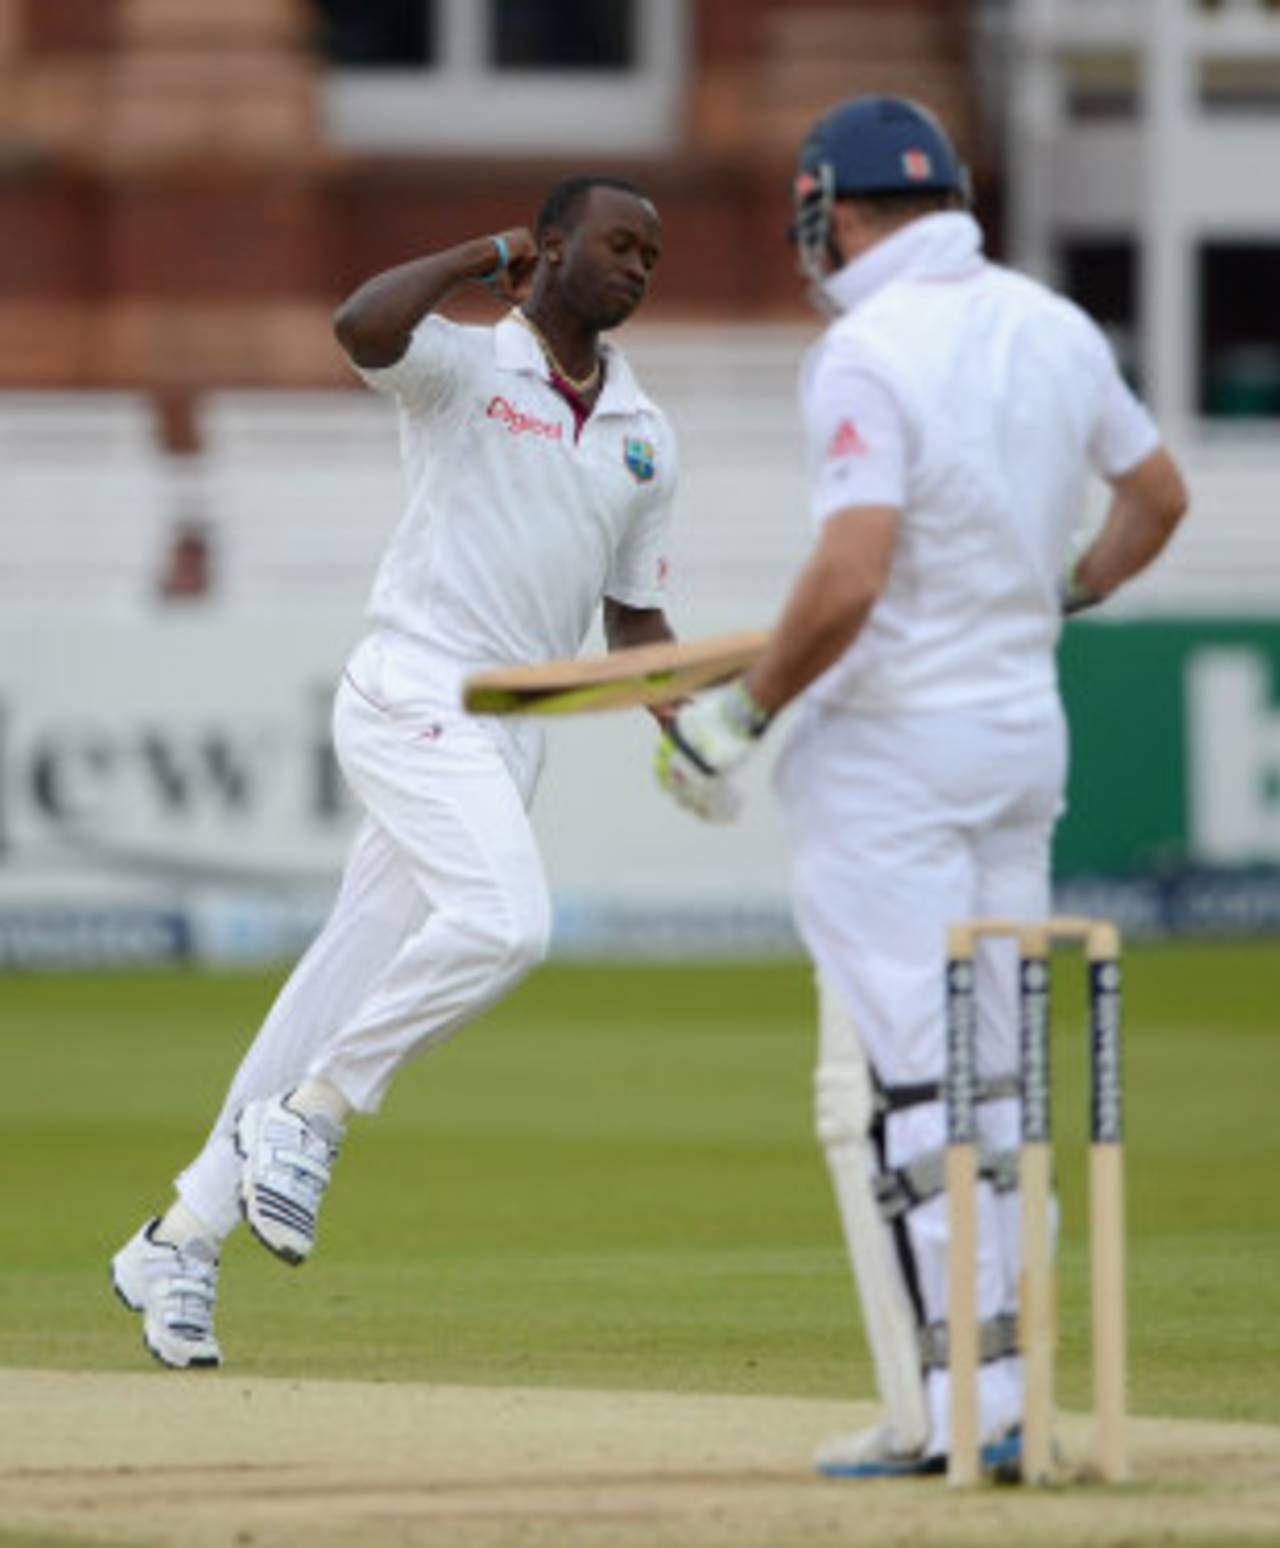 Kemar Roach celebrates the wicket of Andrew Strauss, England v West Indies, 1st Test, Lord's, 4th day, May 20, 2012